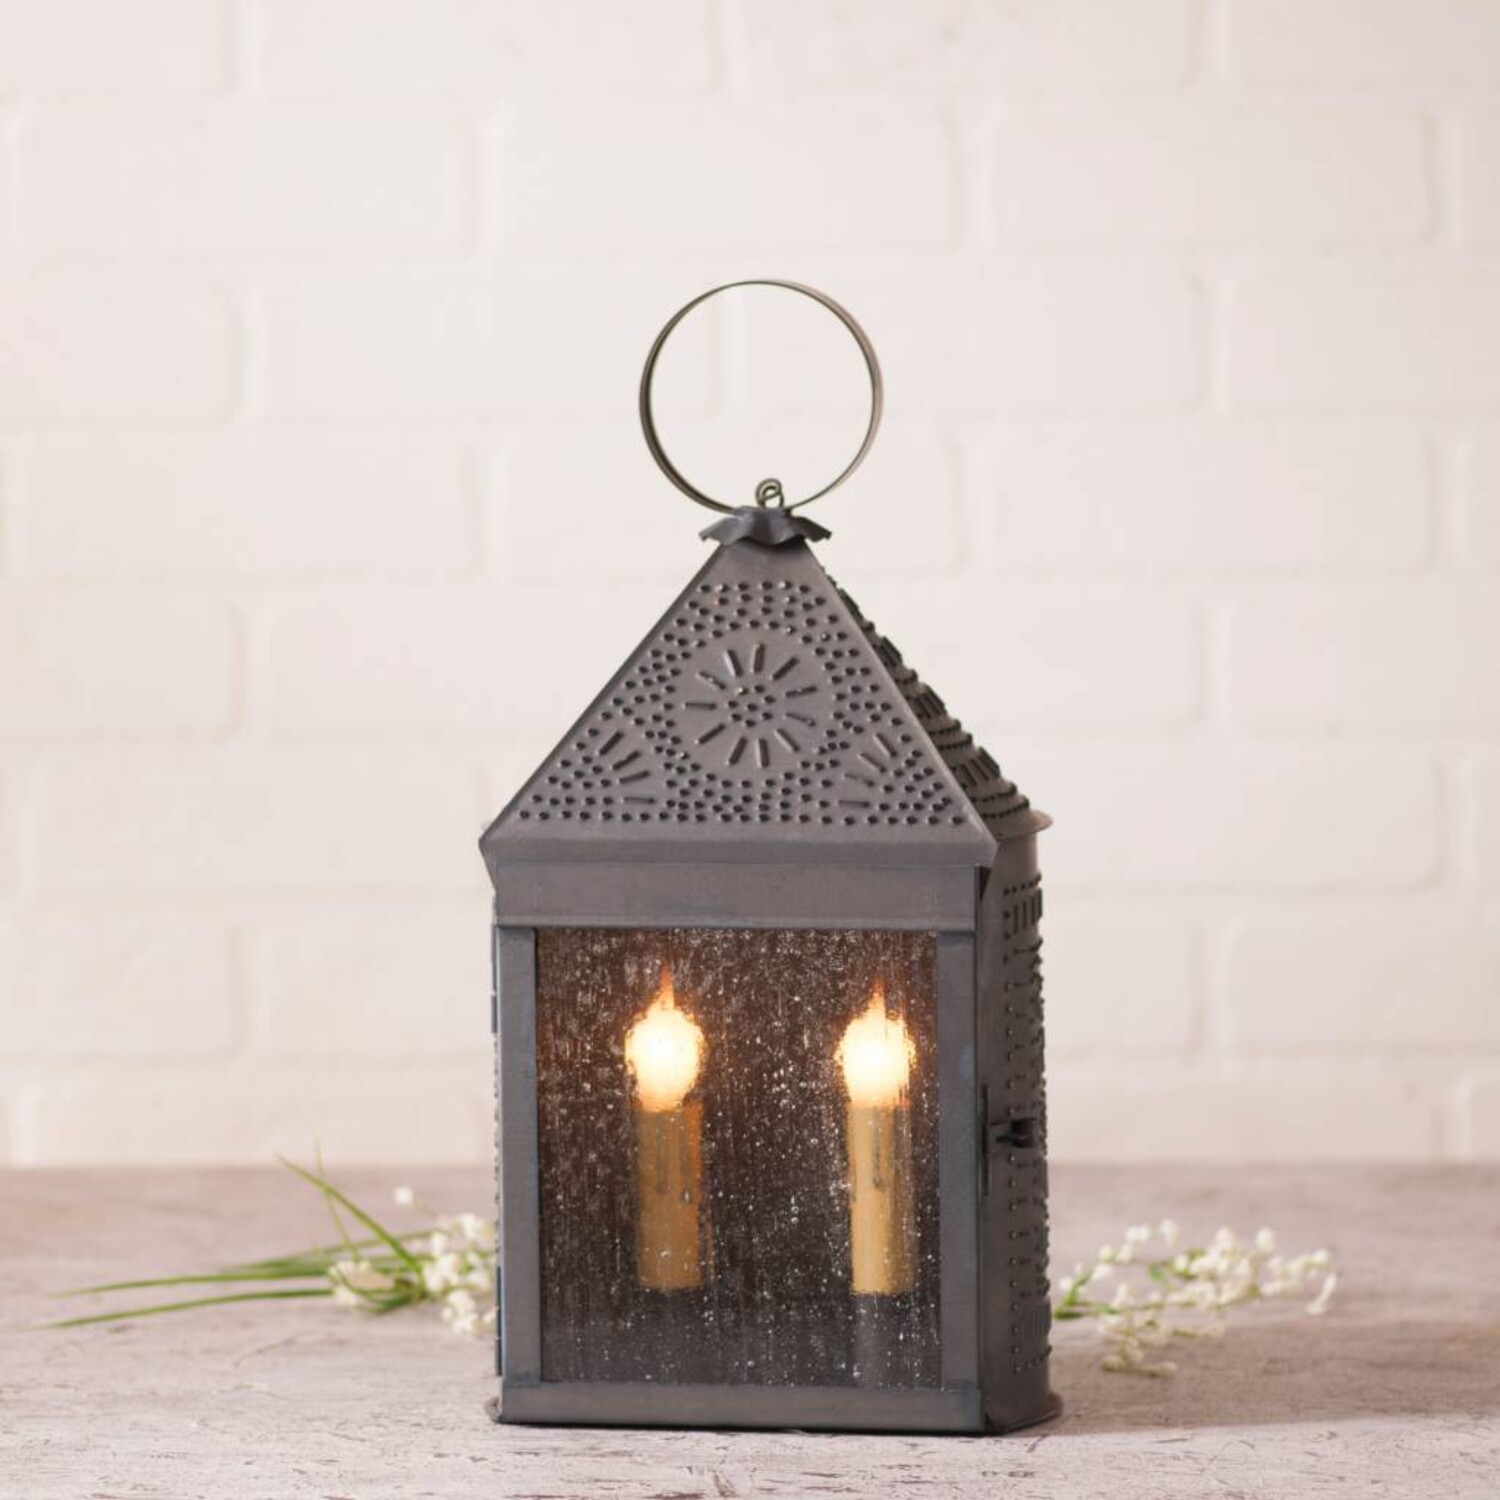 Irvins Tinware: Candle Warmer with Regular Star in Rustic Tin